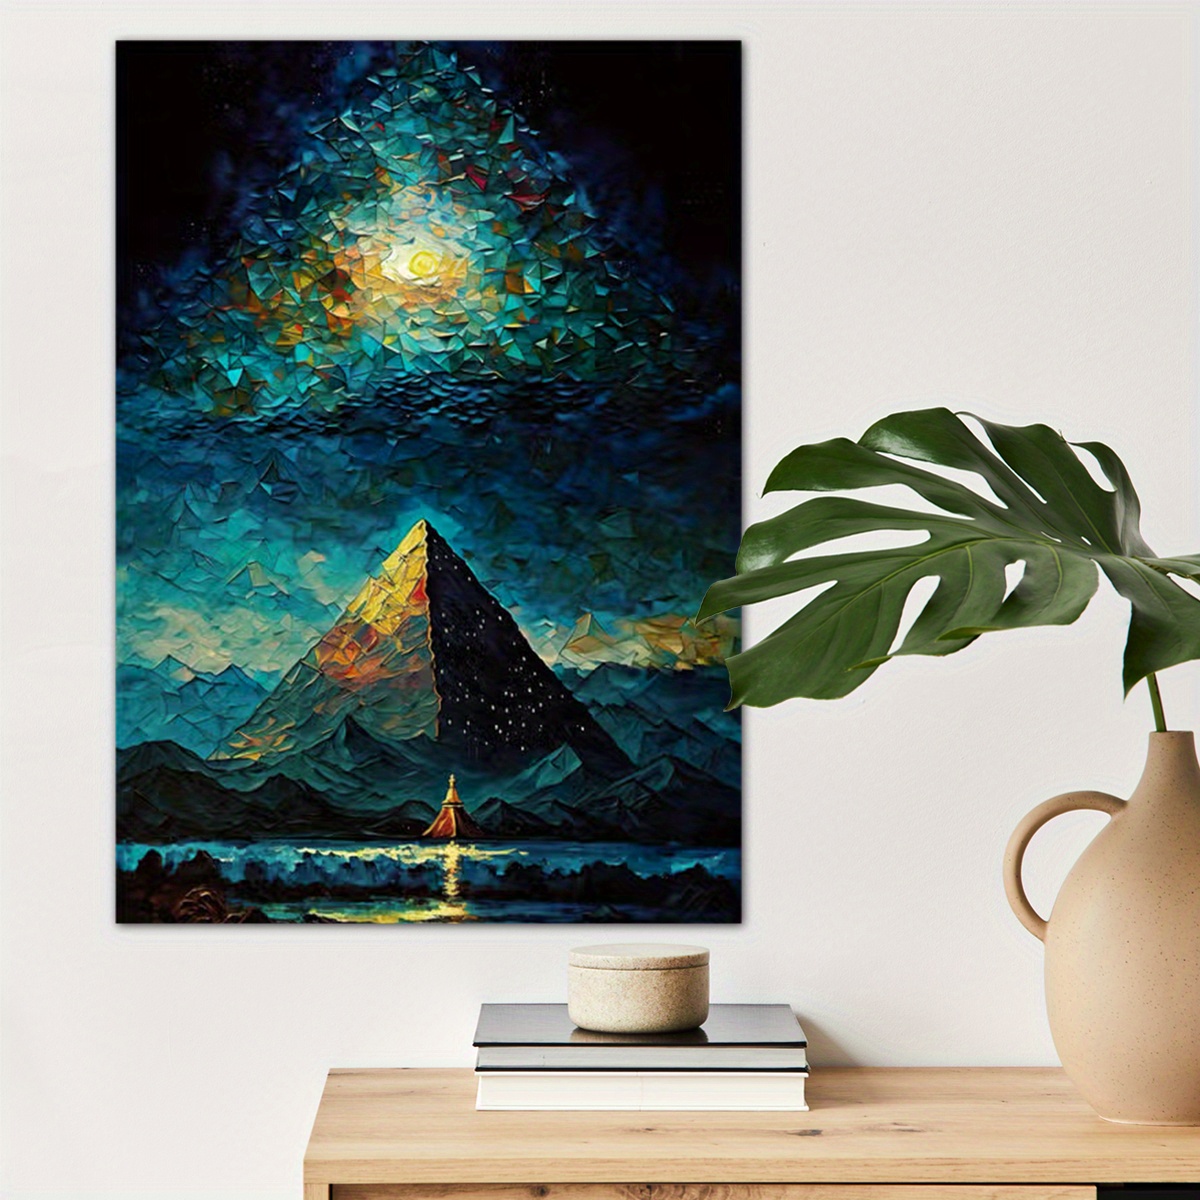 

1pc Pyramid Poster Canvas Wall Art For Home Decor, Oil Painting Style Poster Wall Decor High Quality Canvas Prints For Living Room Bedroom Kitchen Office Cafe Decor, Perfect Gift And Decoration